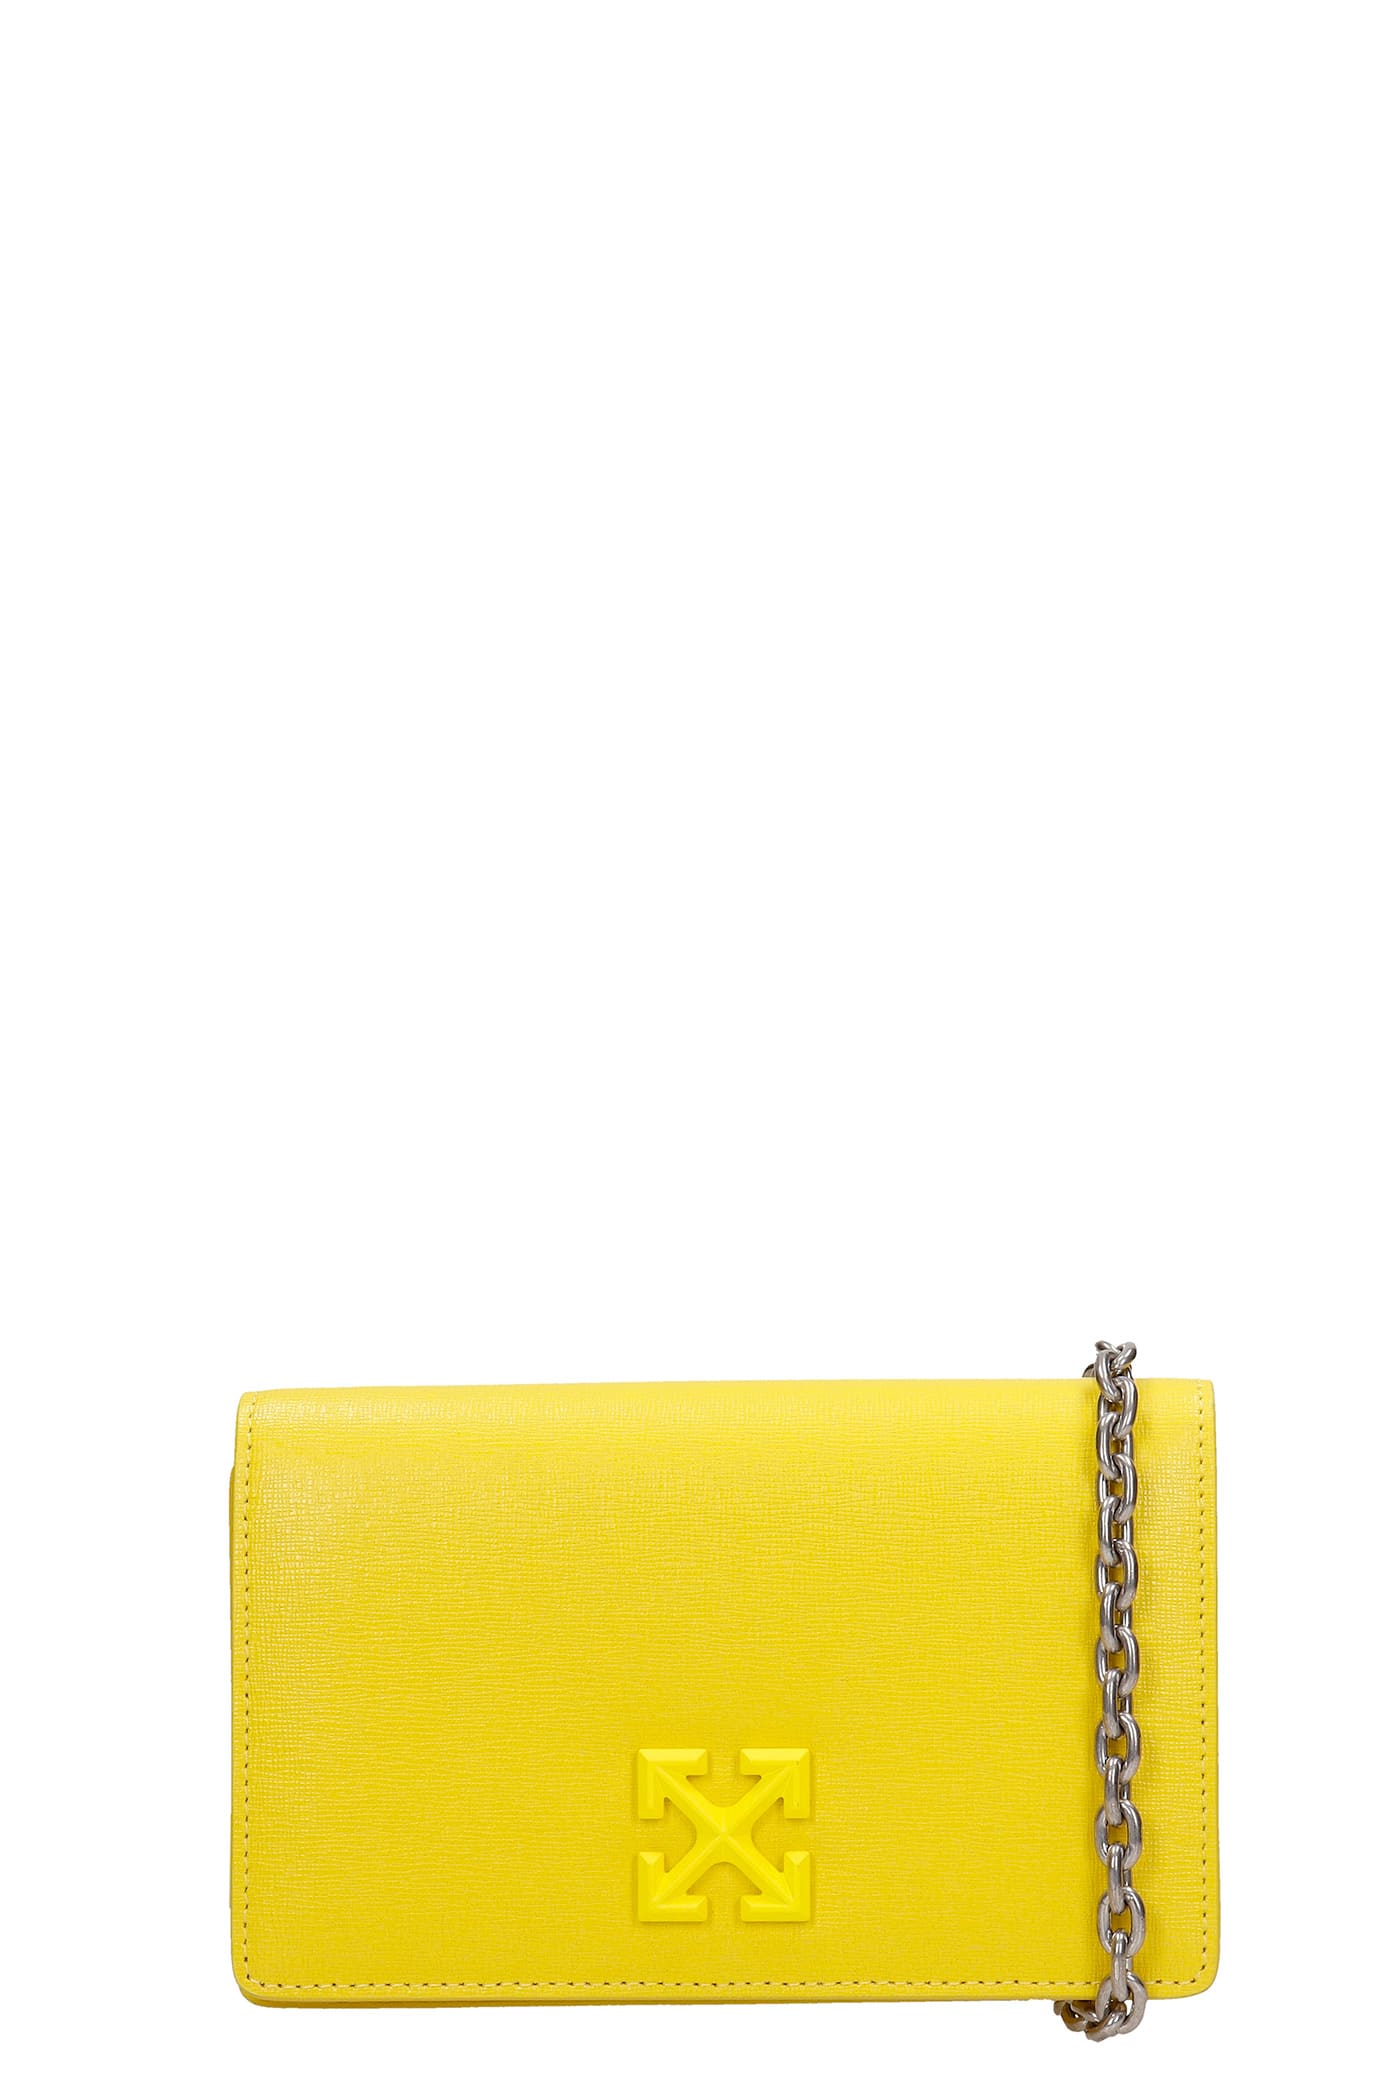 Off-White Shoulder Bag In Yellow Leather